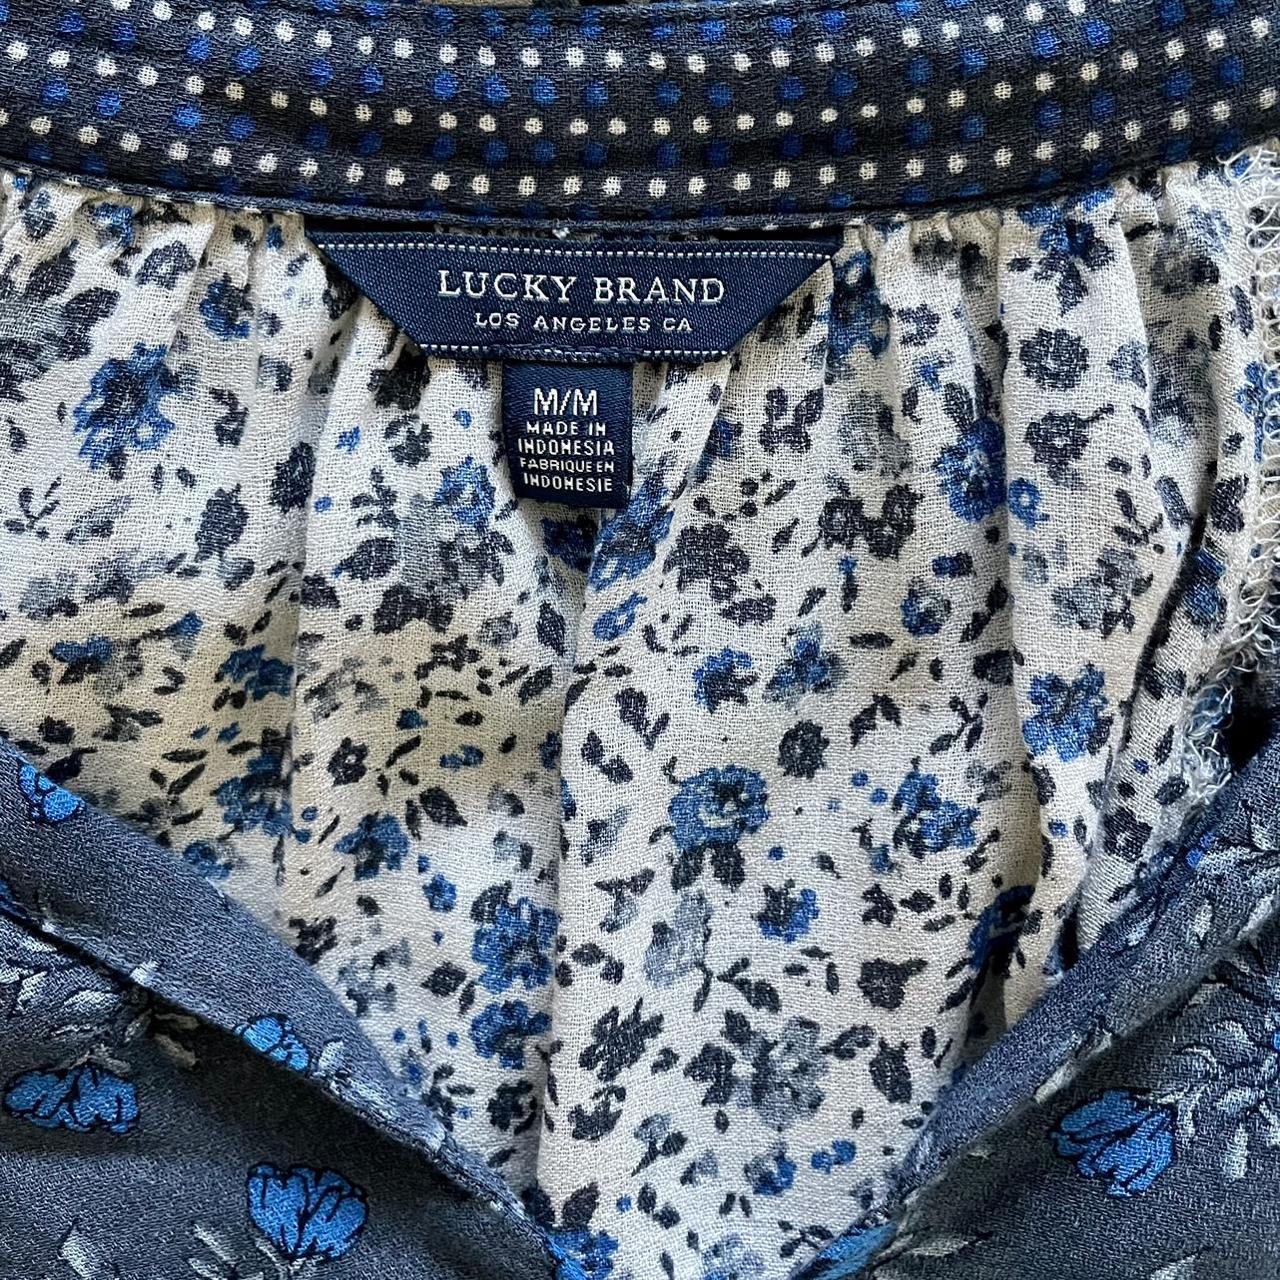 Lucky Brand Border Print Peasant Top Size